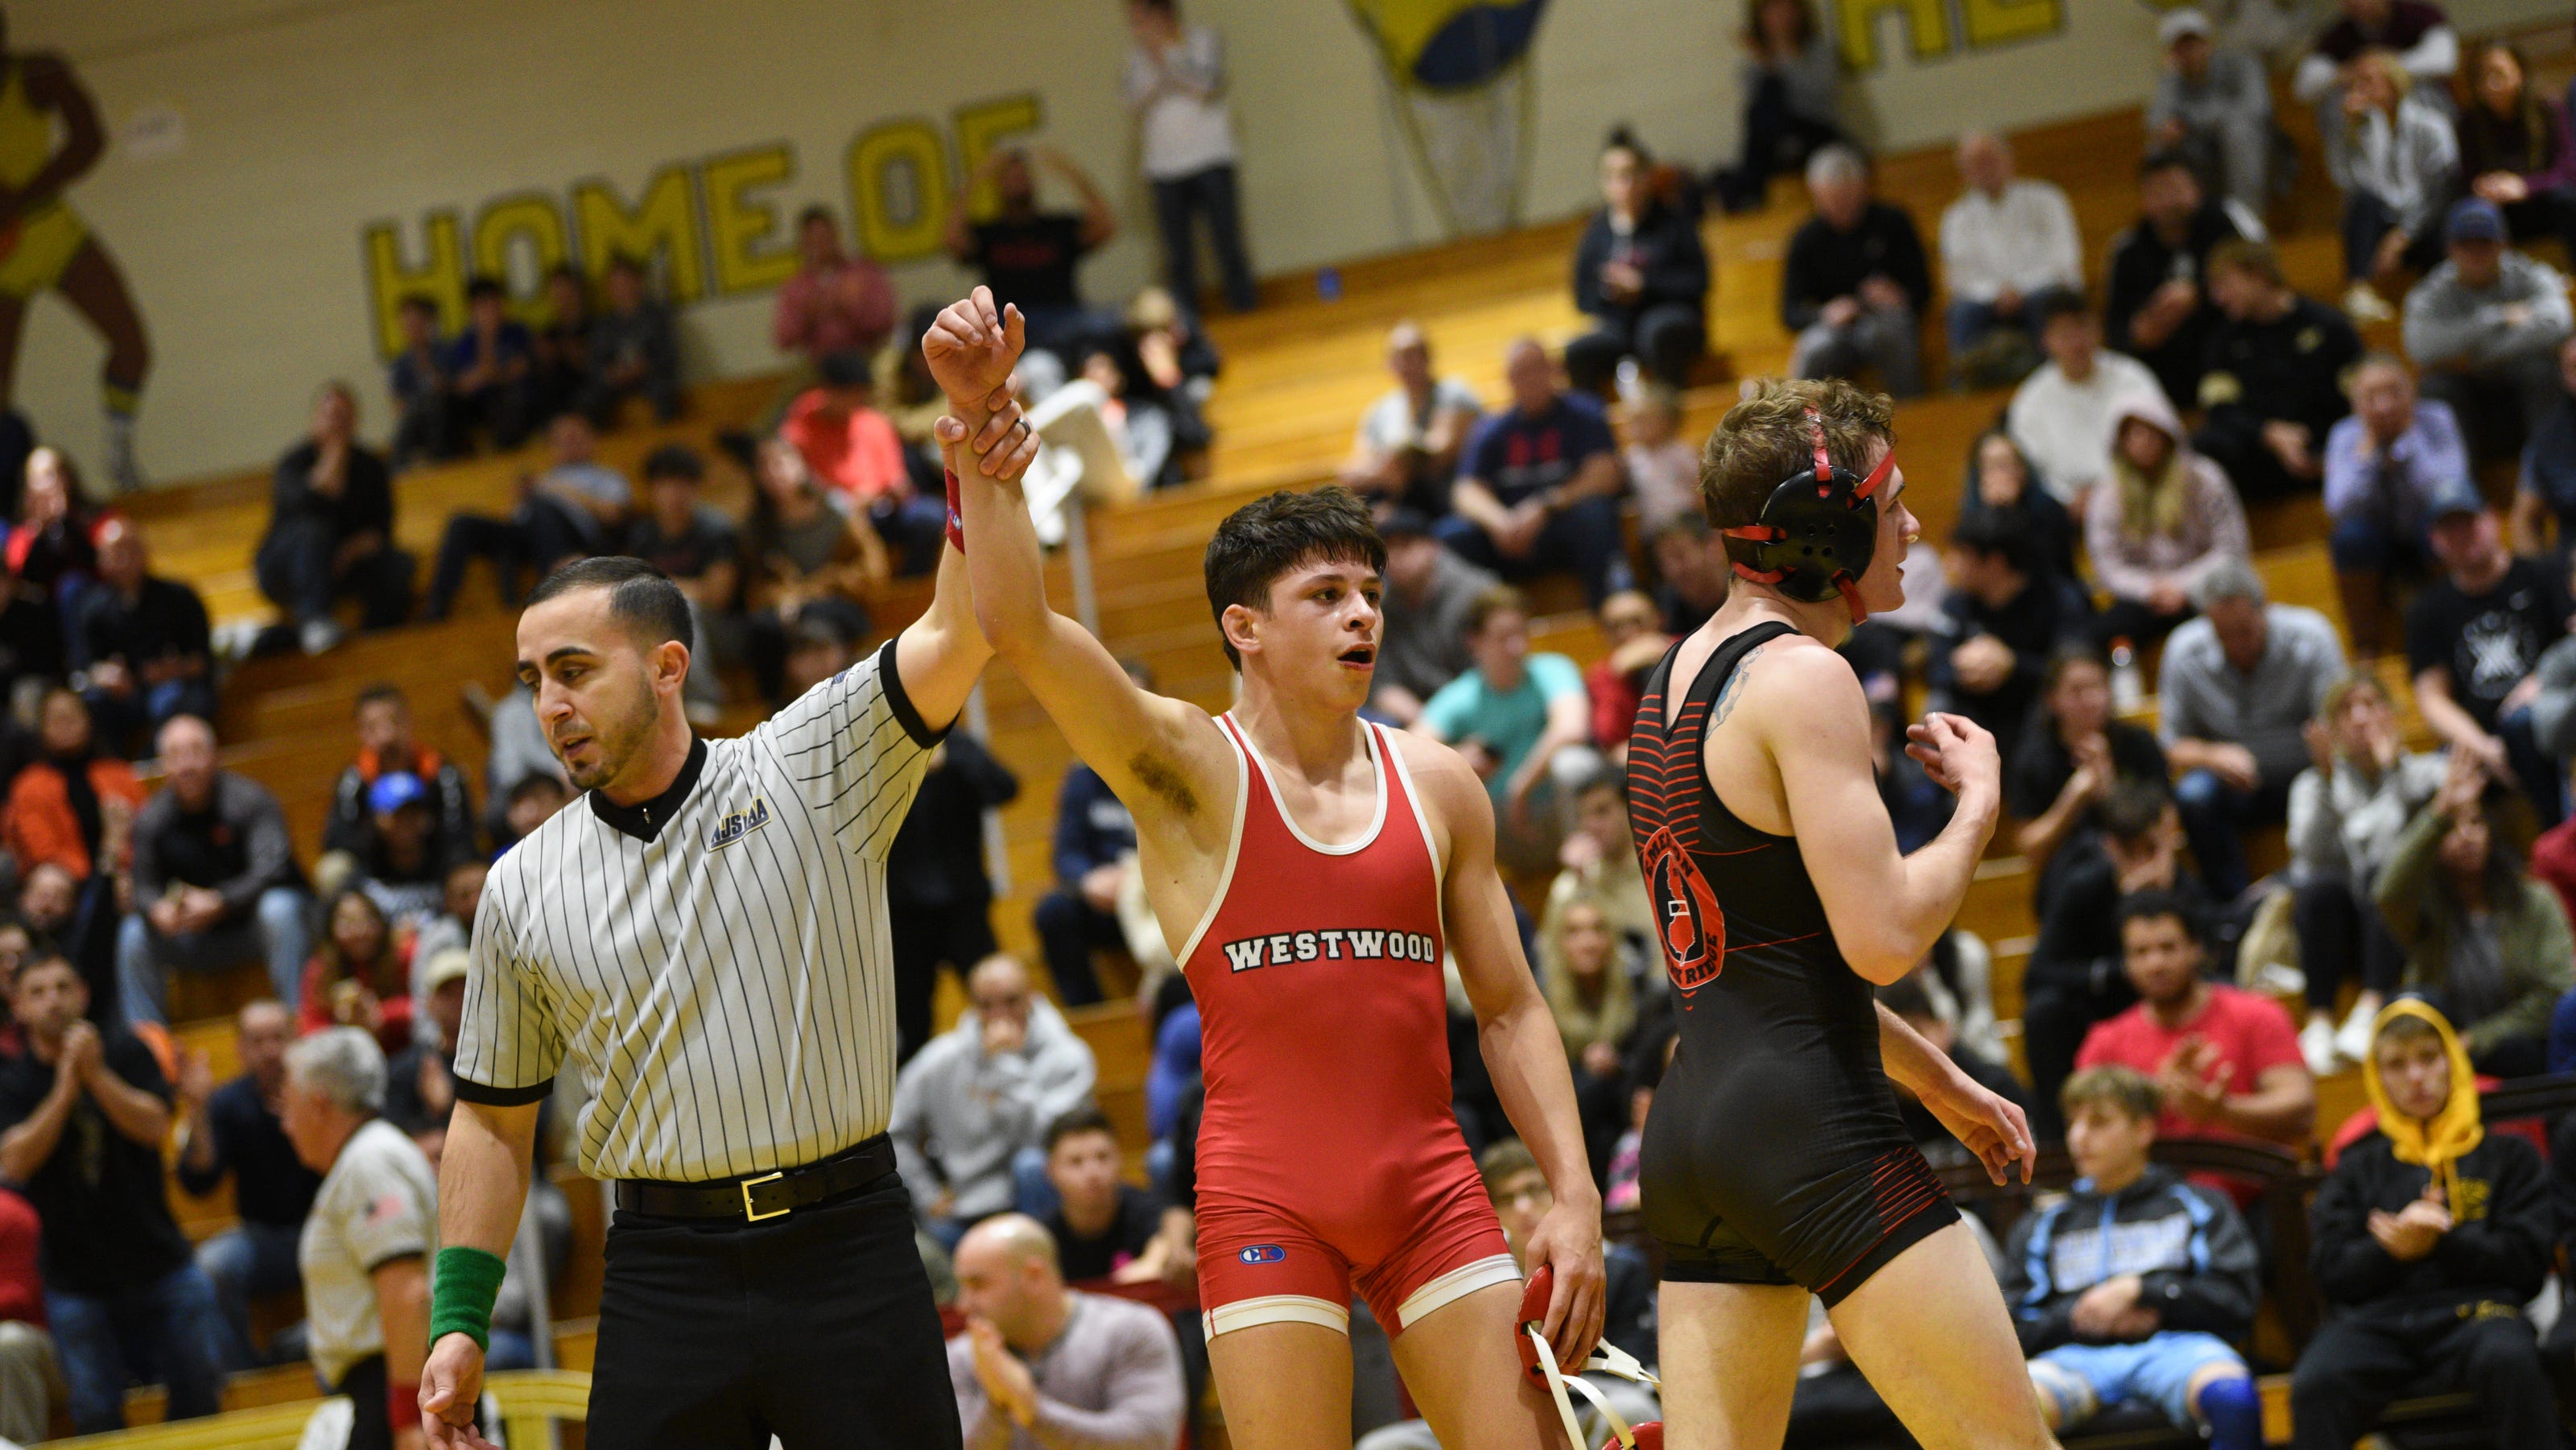 NJ wrestling Weightbyweight recap of BCCA Holiday Tournament